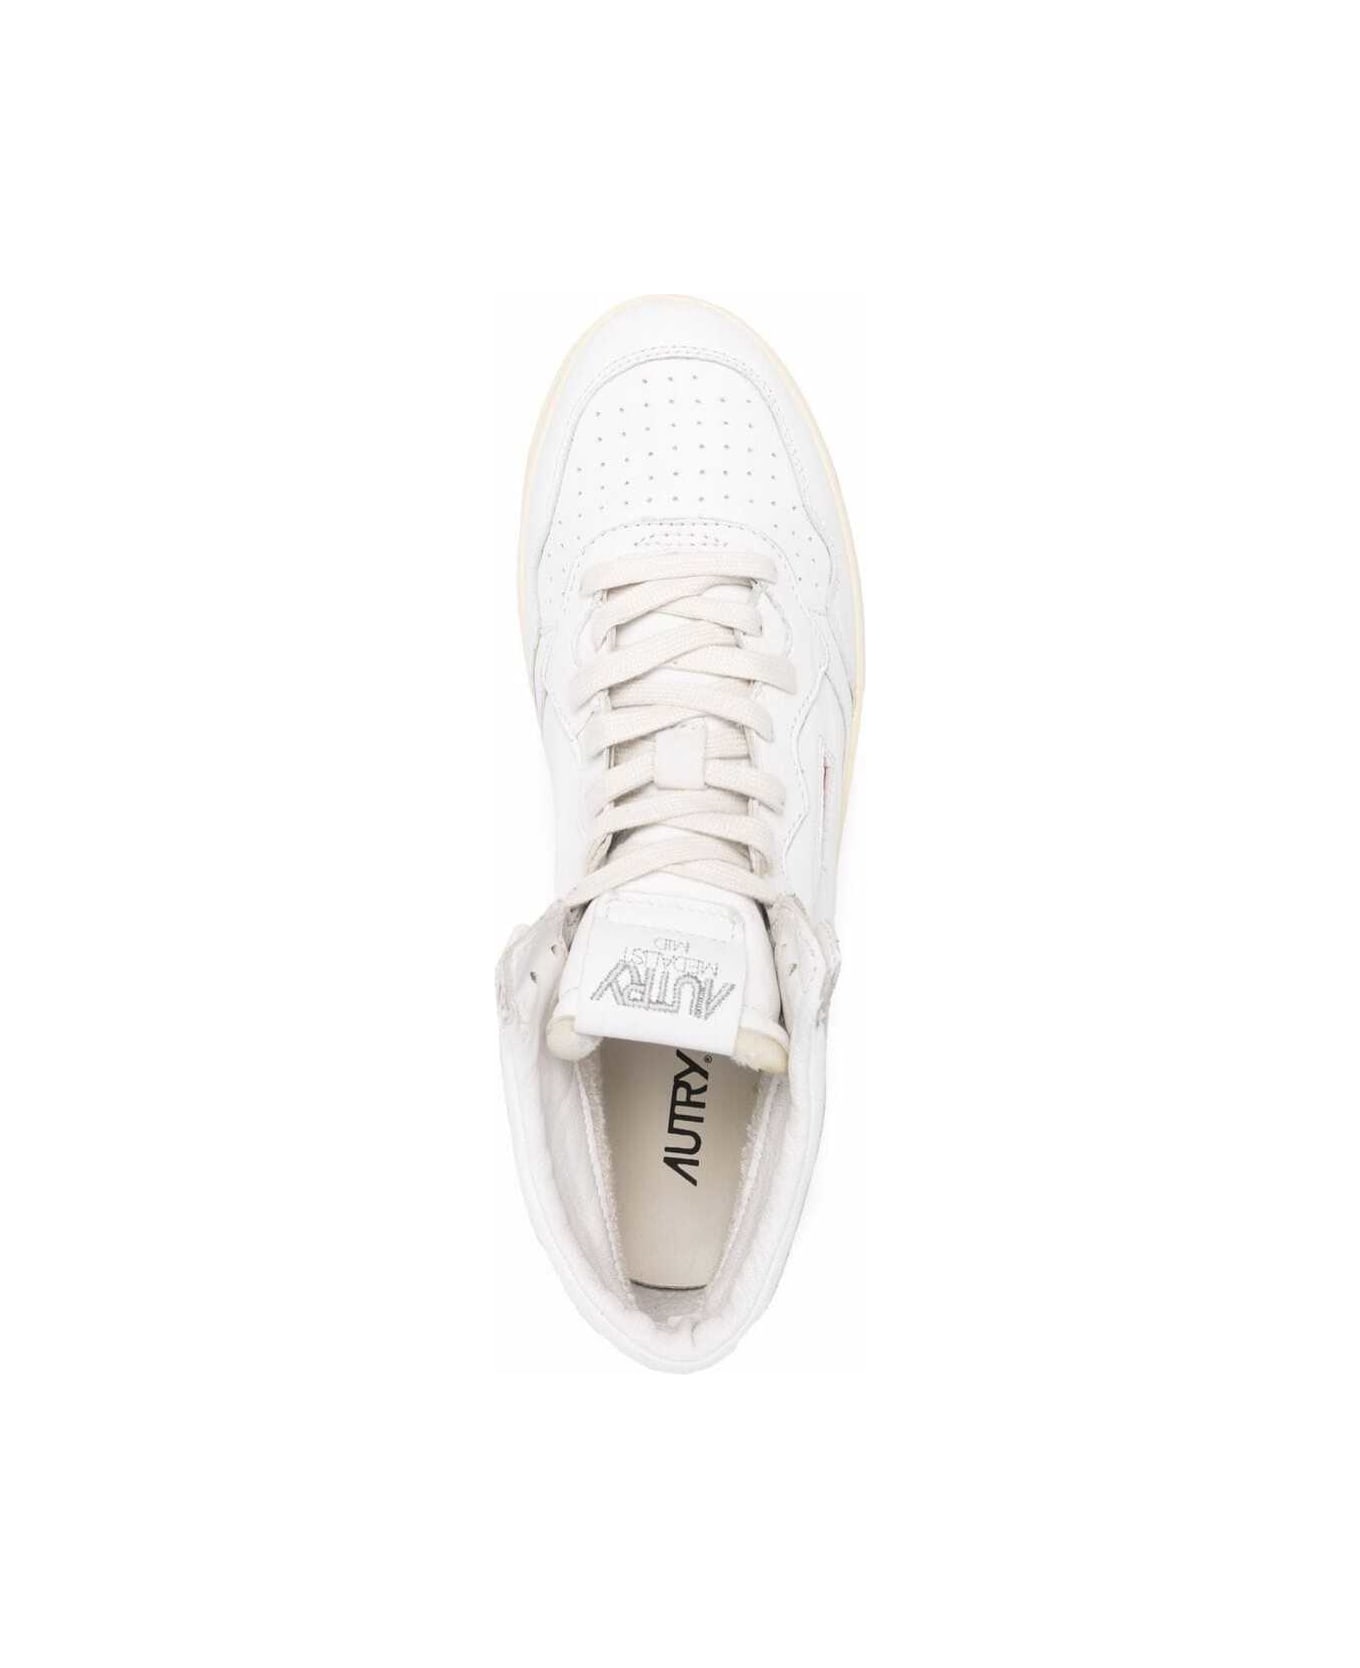 Autry Hig Top White Leather Sneakers With Logo Autry Man - White